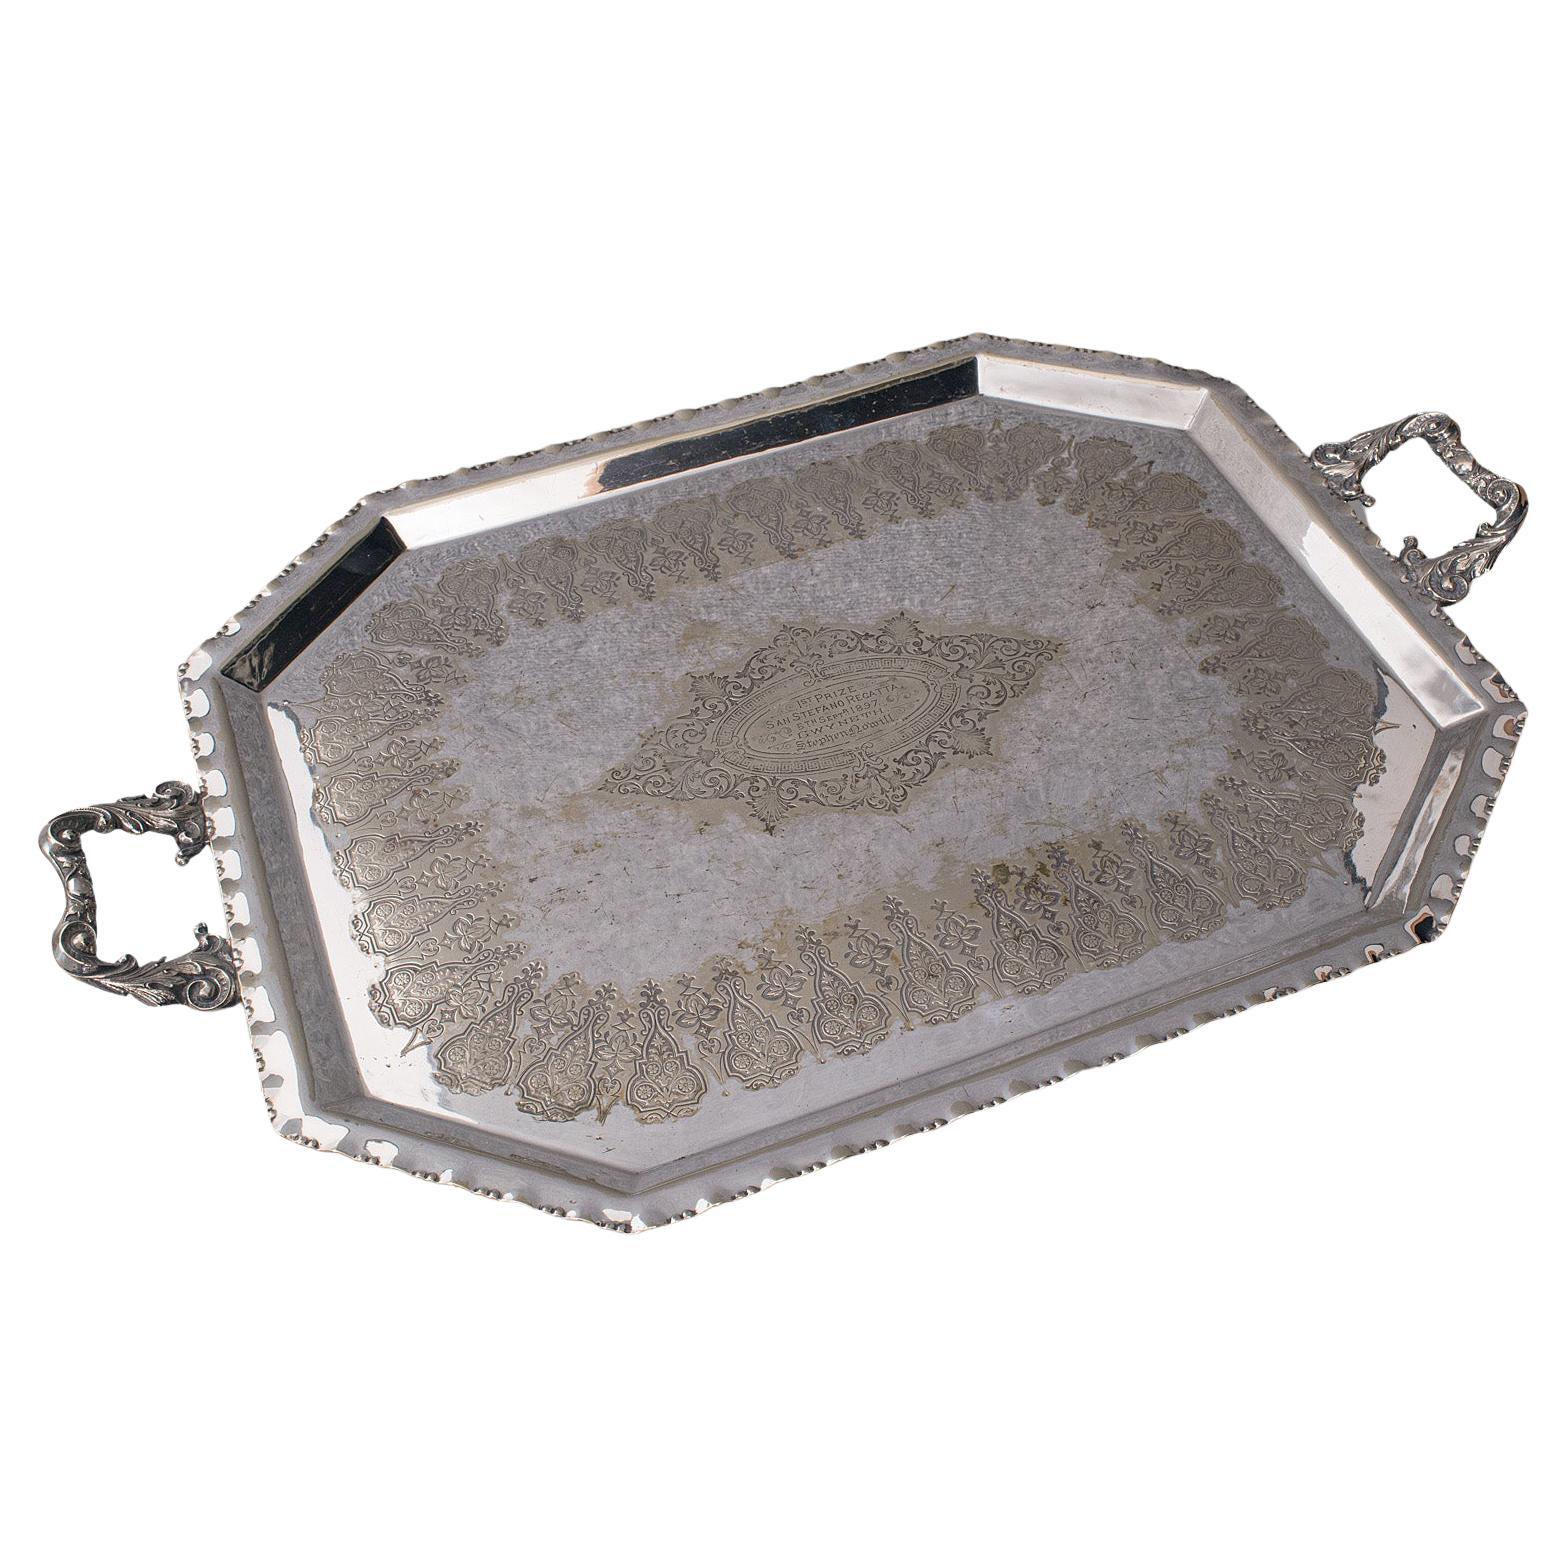 Antique Presentation Serving Tray, English, Silver Plated, Afternoon Tea, C.1895